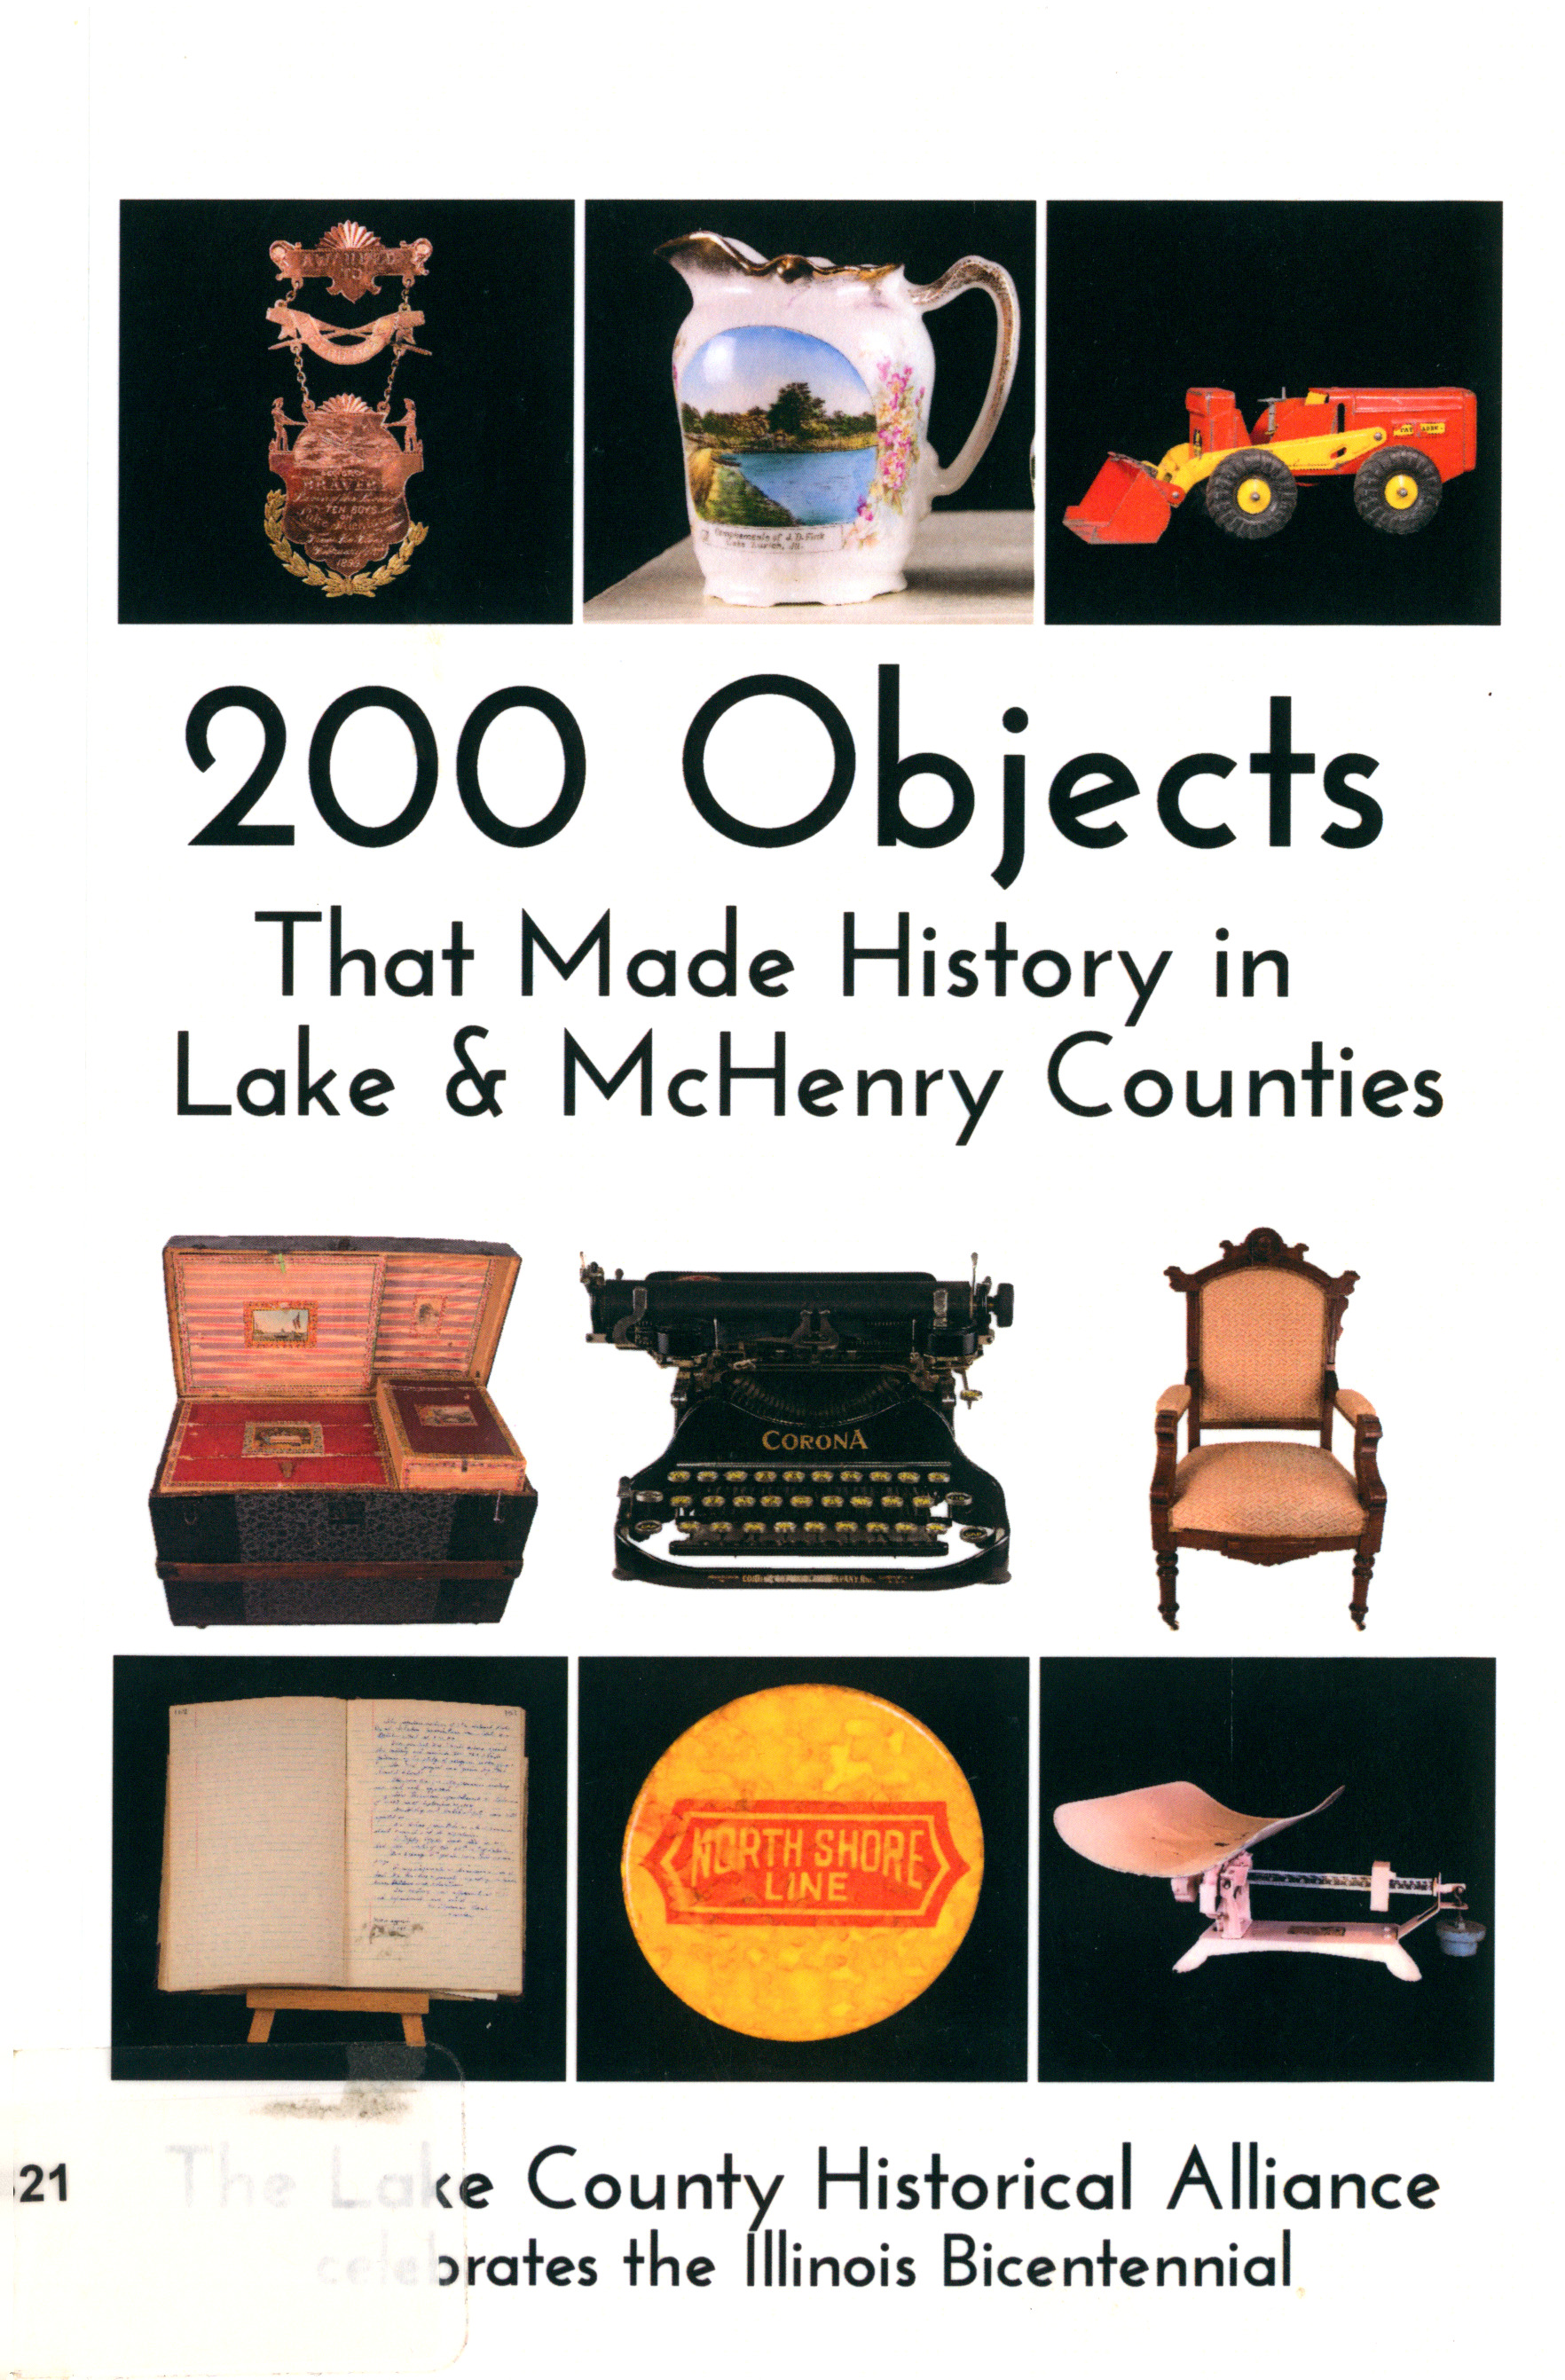 Image for "200 Objects That Made History in Lake and Mchenry Counties"